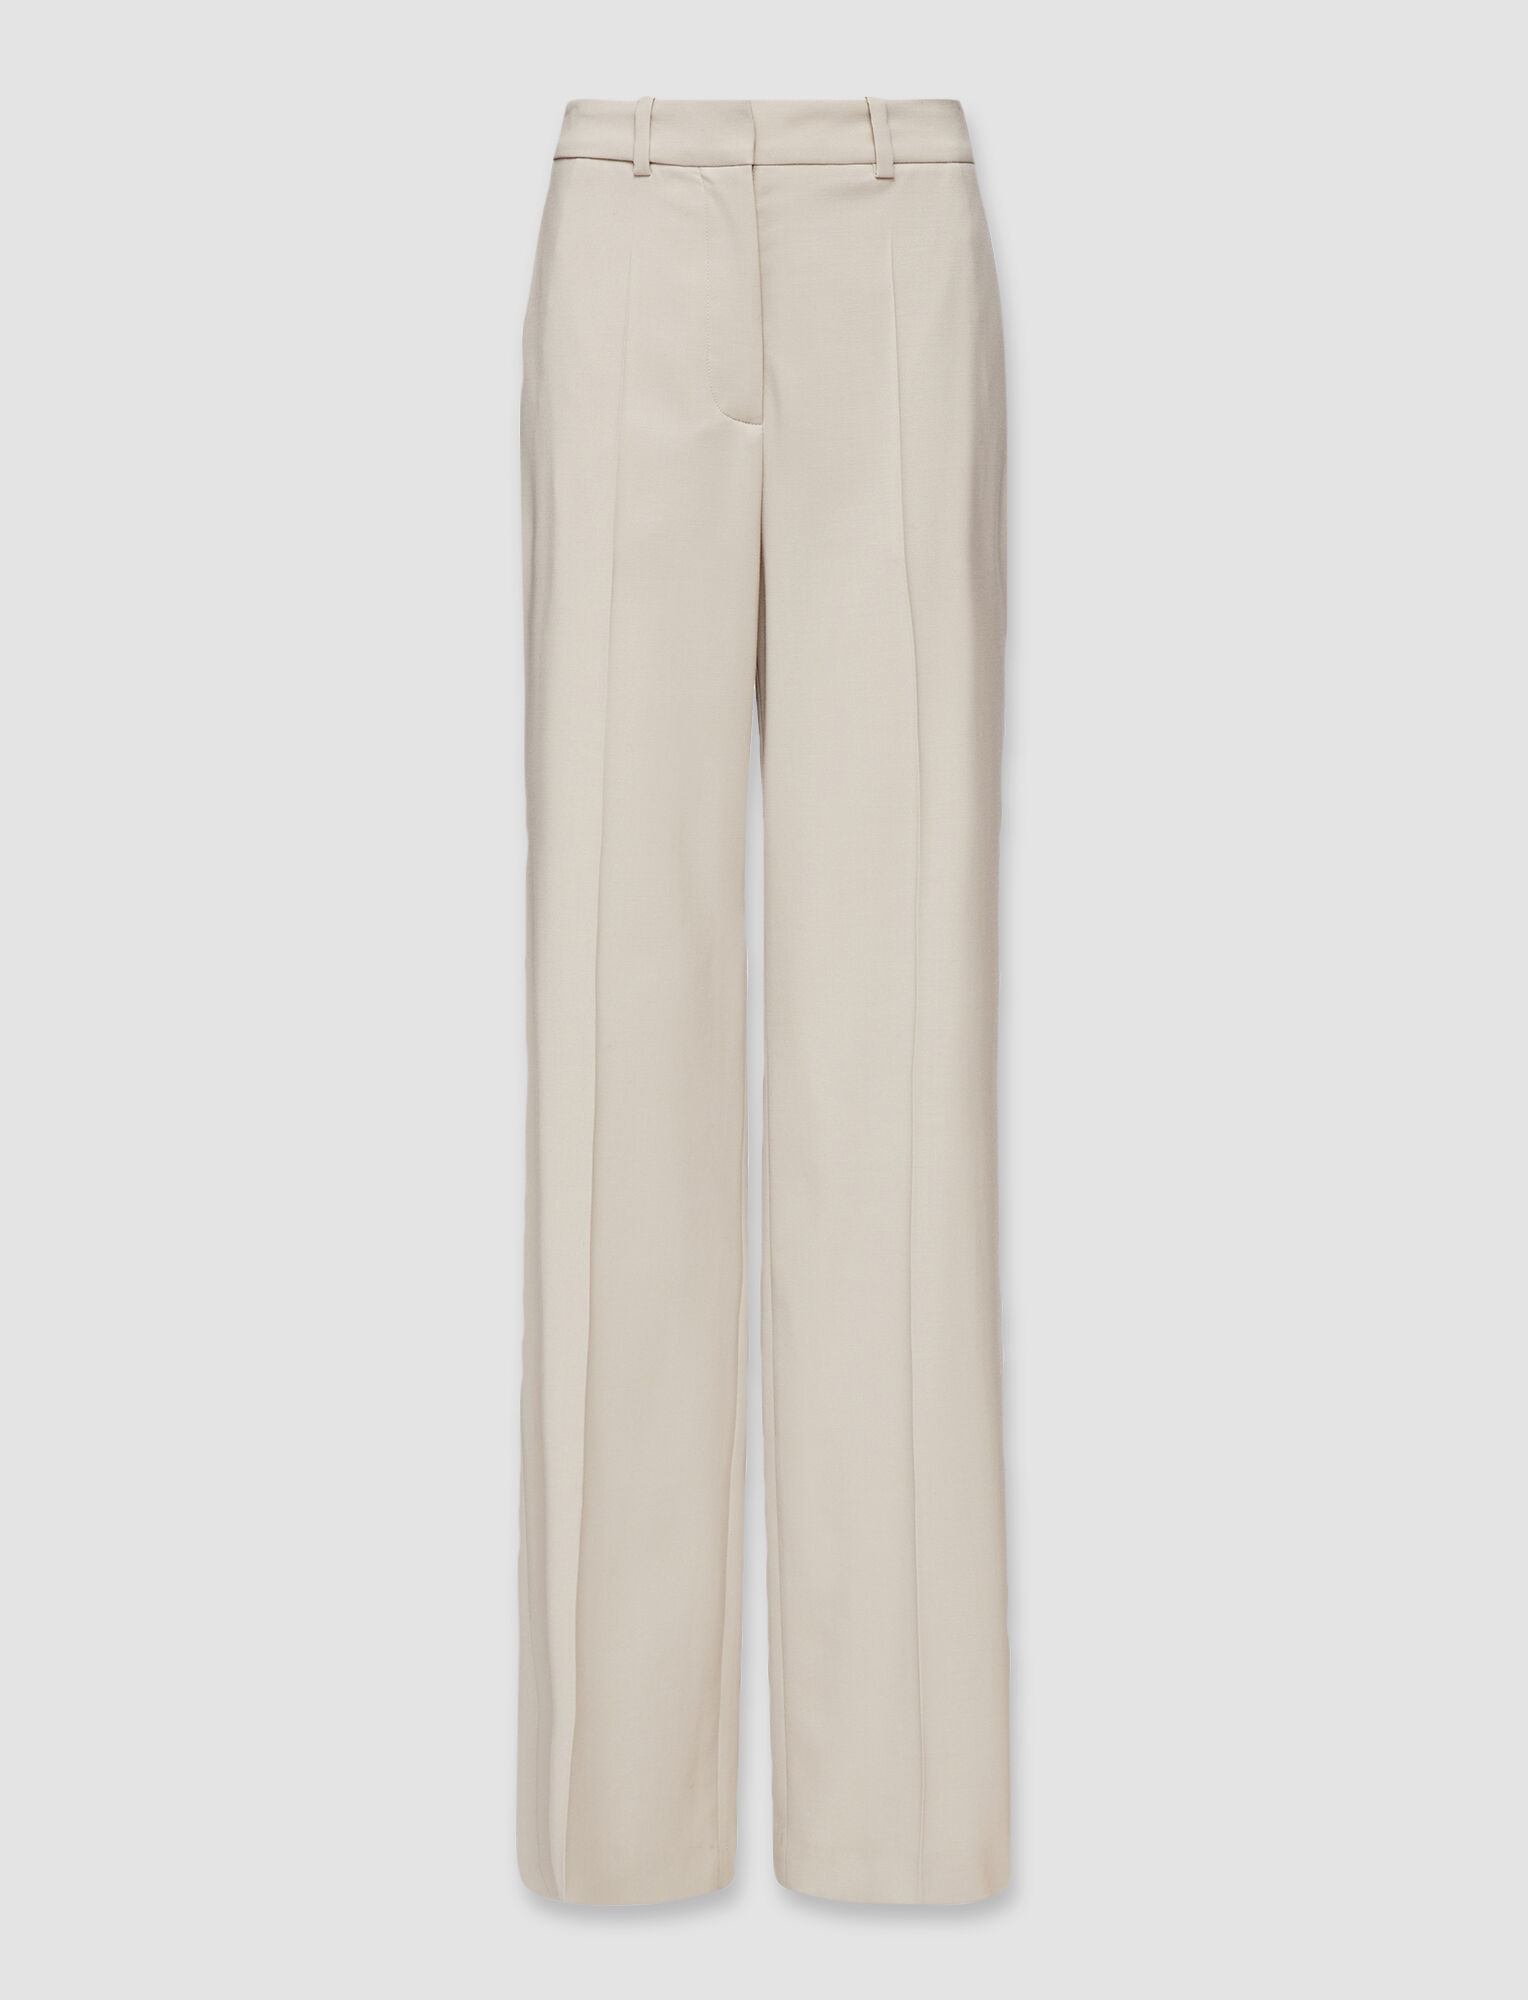 Joseph, Tailoring Wool Stretch Morissey Trousers, in Cobble Stone